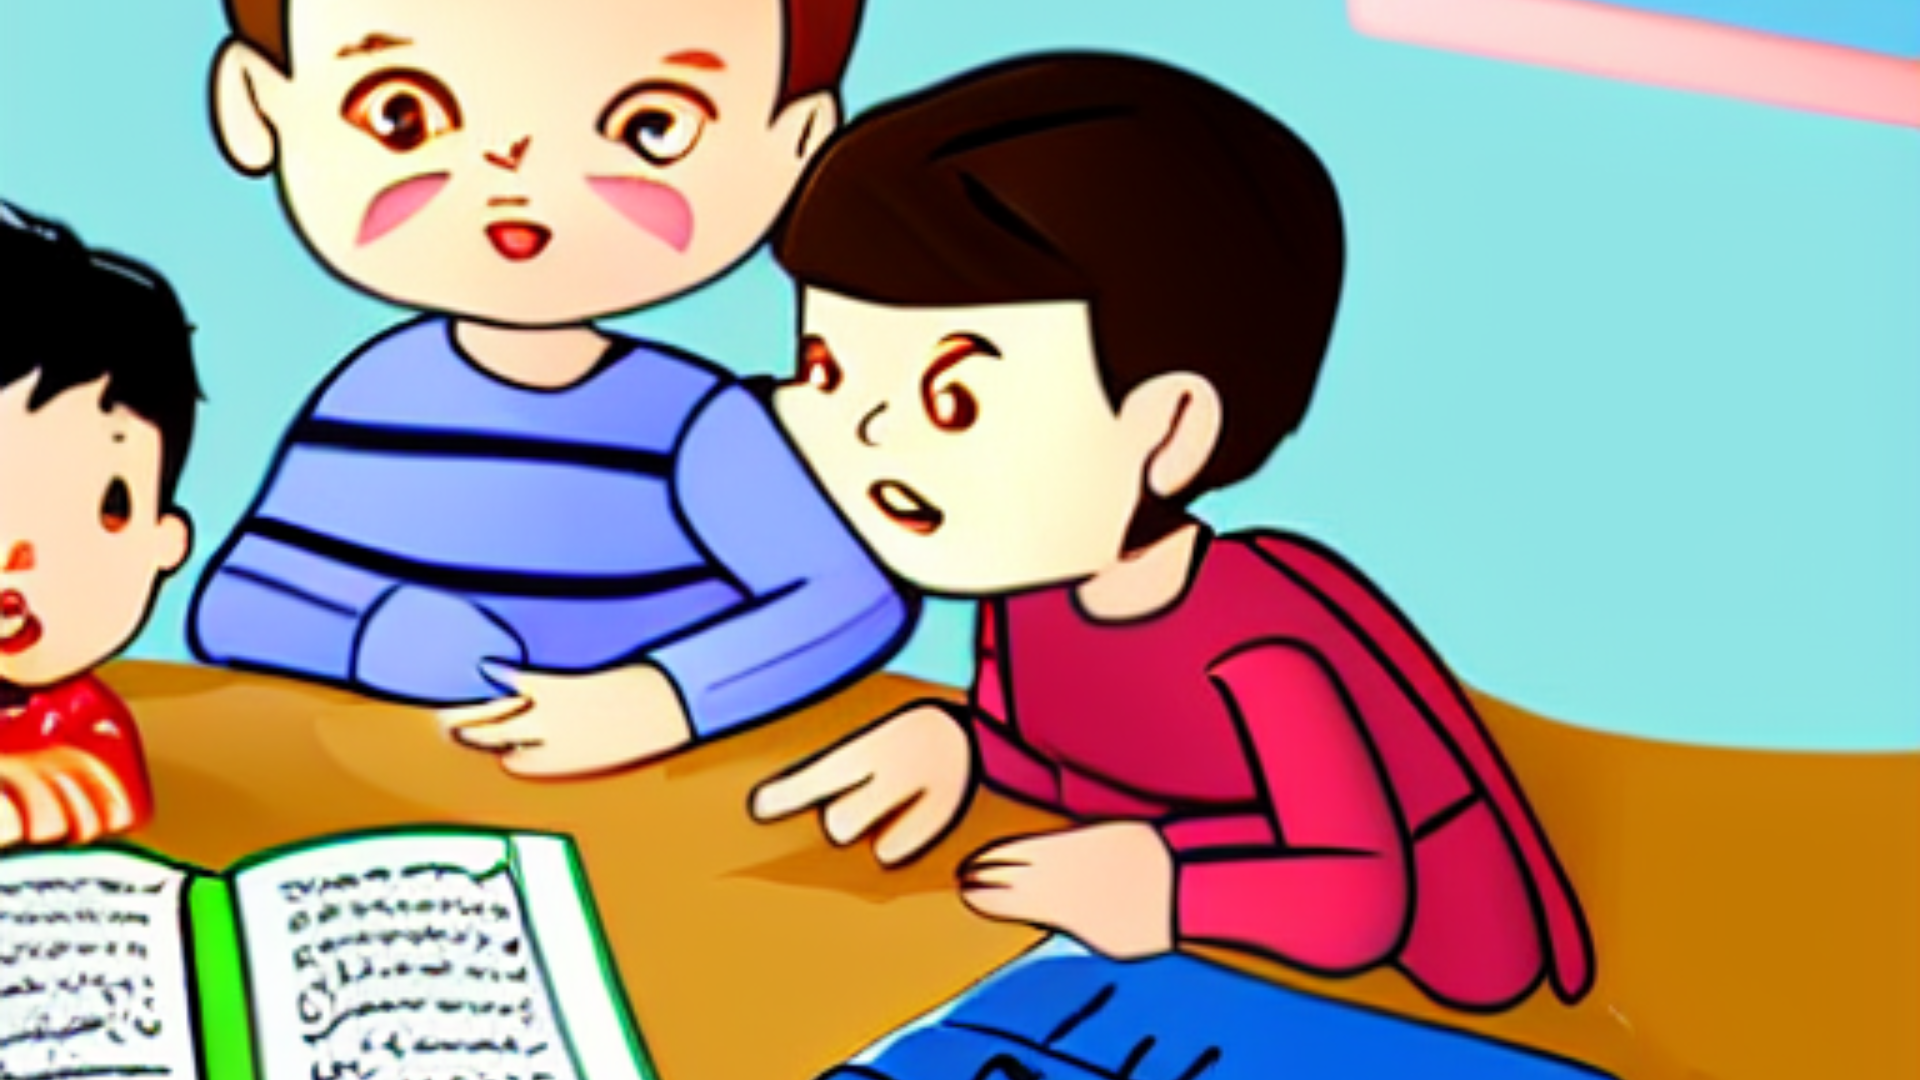 Naughty kids learning Quran